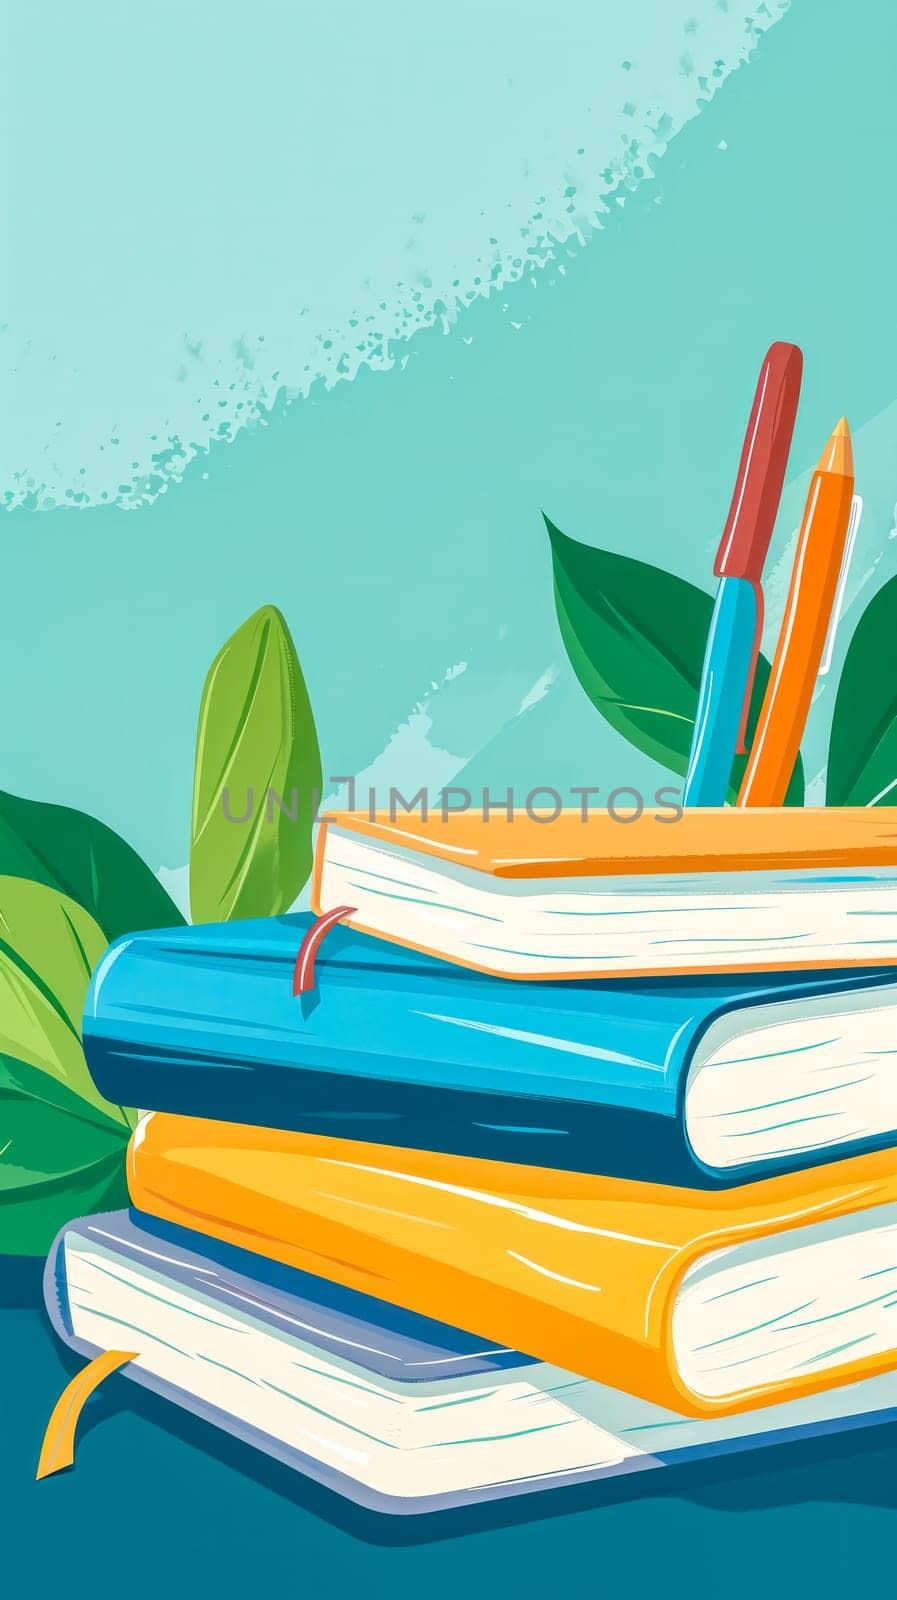 Illustration of stacked books with a pen and pencil, symbolizing education and learning. by Edophoto